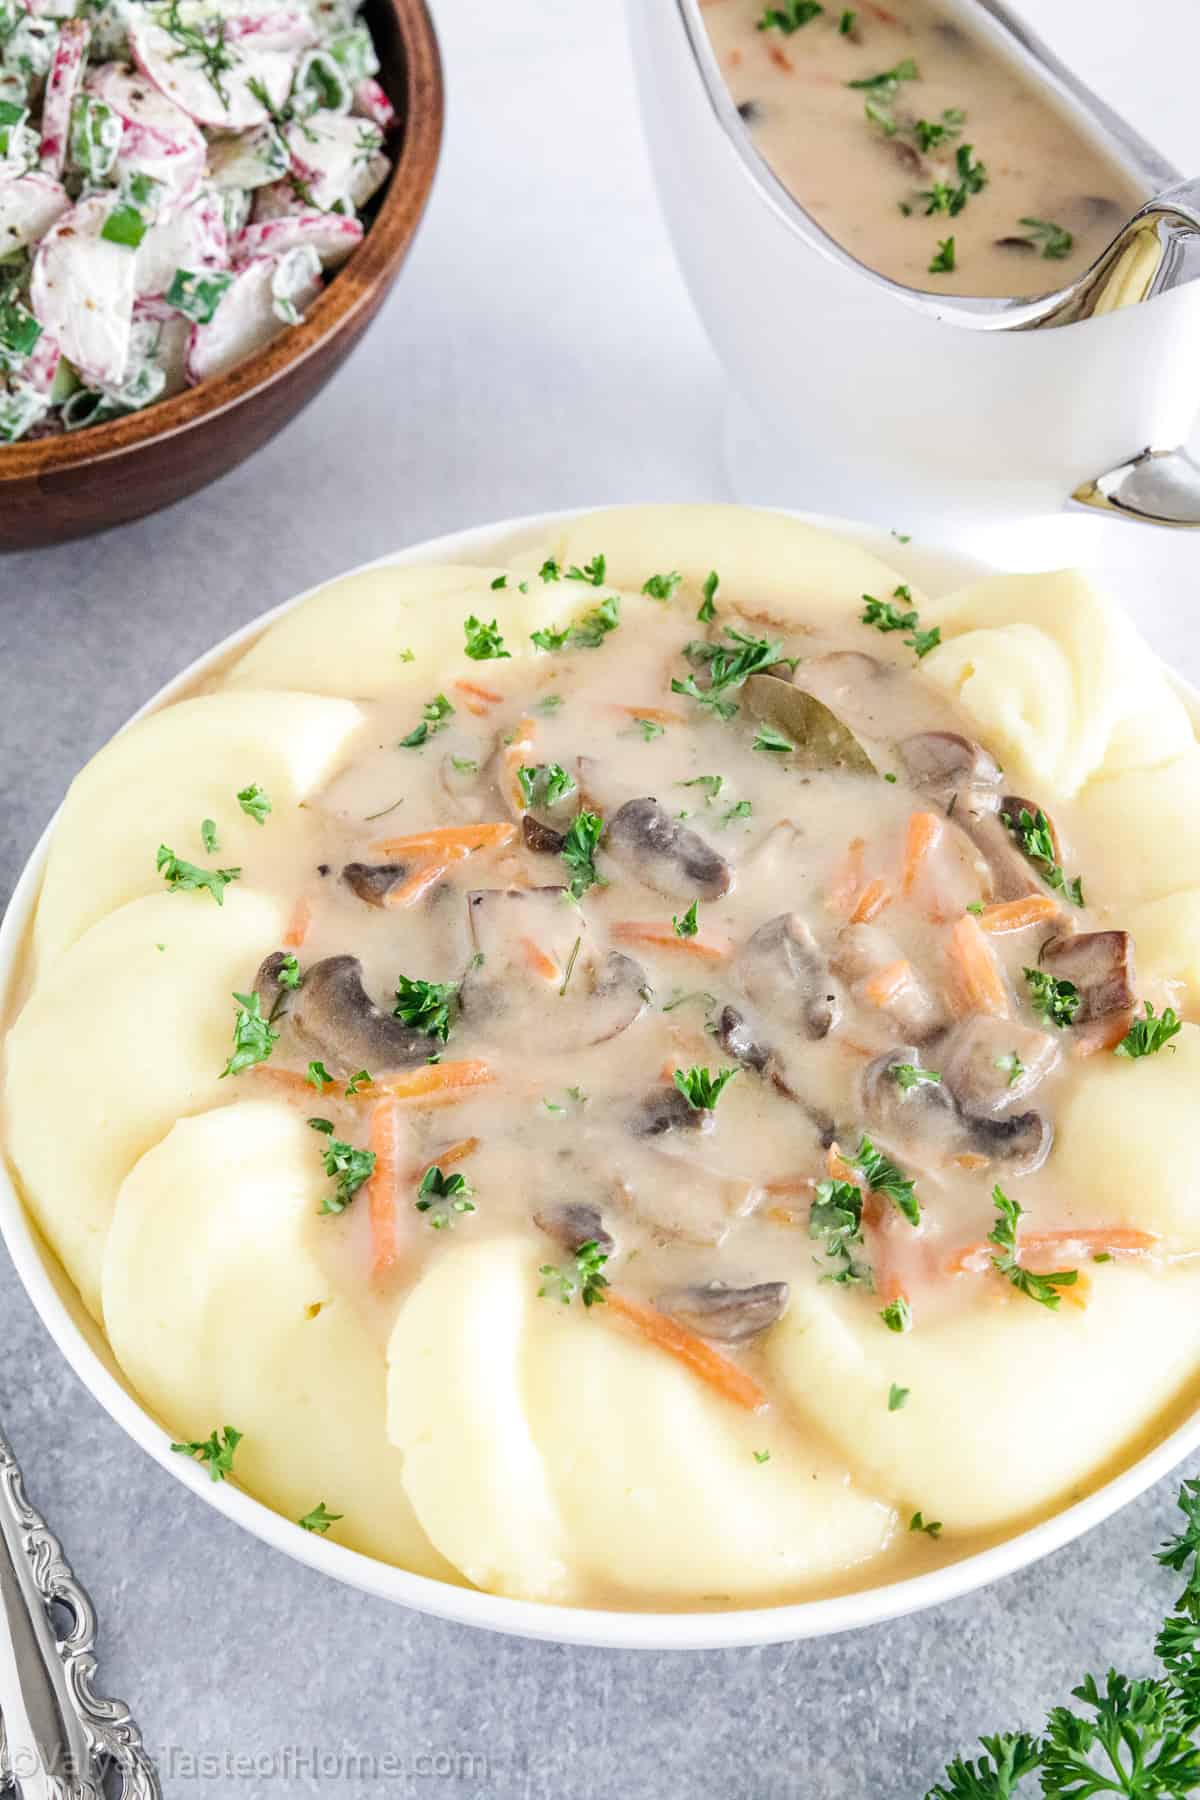 If you've been looking for the perfect Mushroom Gravy recipe then this is the one for you! Mushroom gravy is a classic and comforting sauce that can elevate any dish, from roasted meats to mashed potatoes.